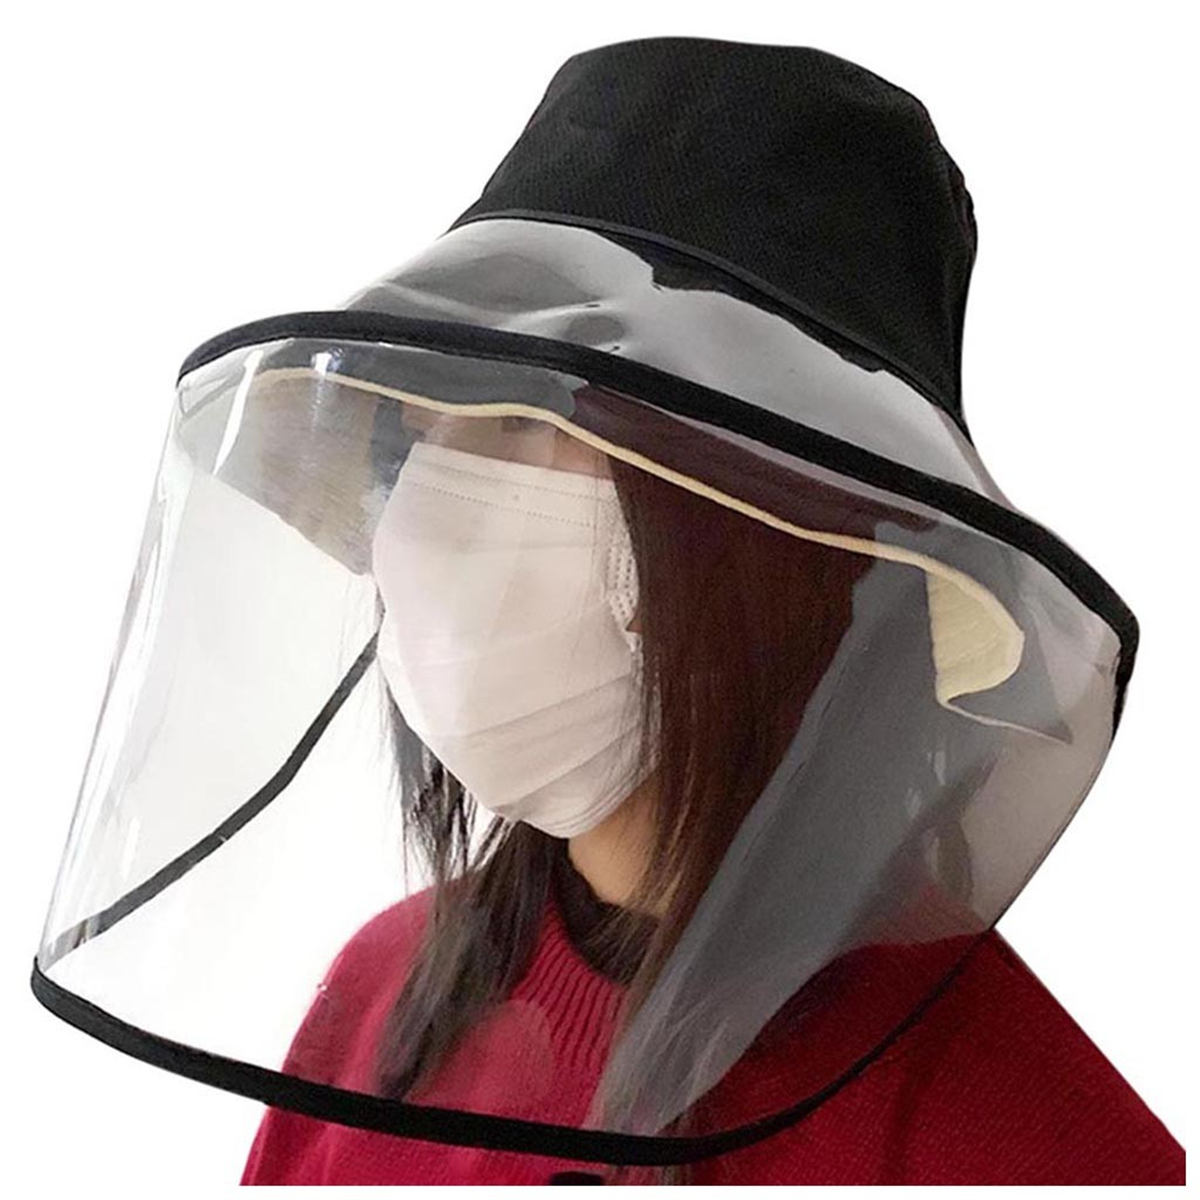 Fisherman-Hat-Clear-Mask-Removable-Protective-Cap-Anti-fog-Full-Face-Outdoor-1657444-10